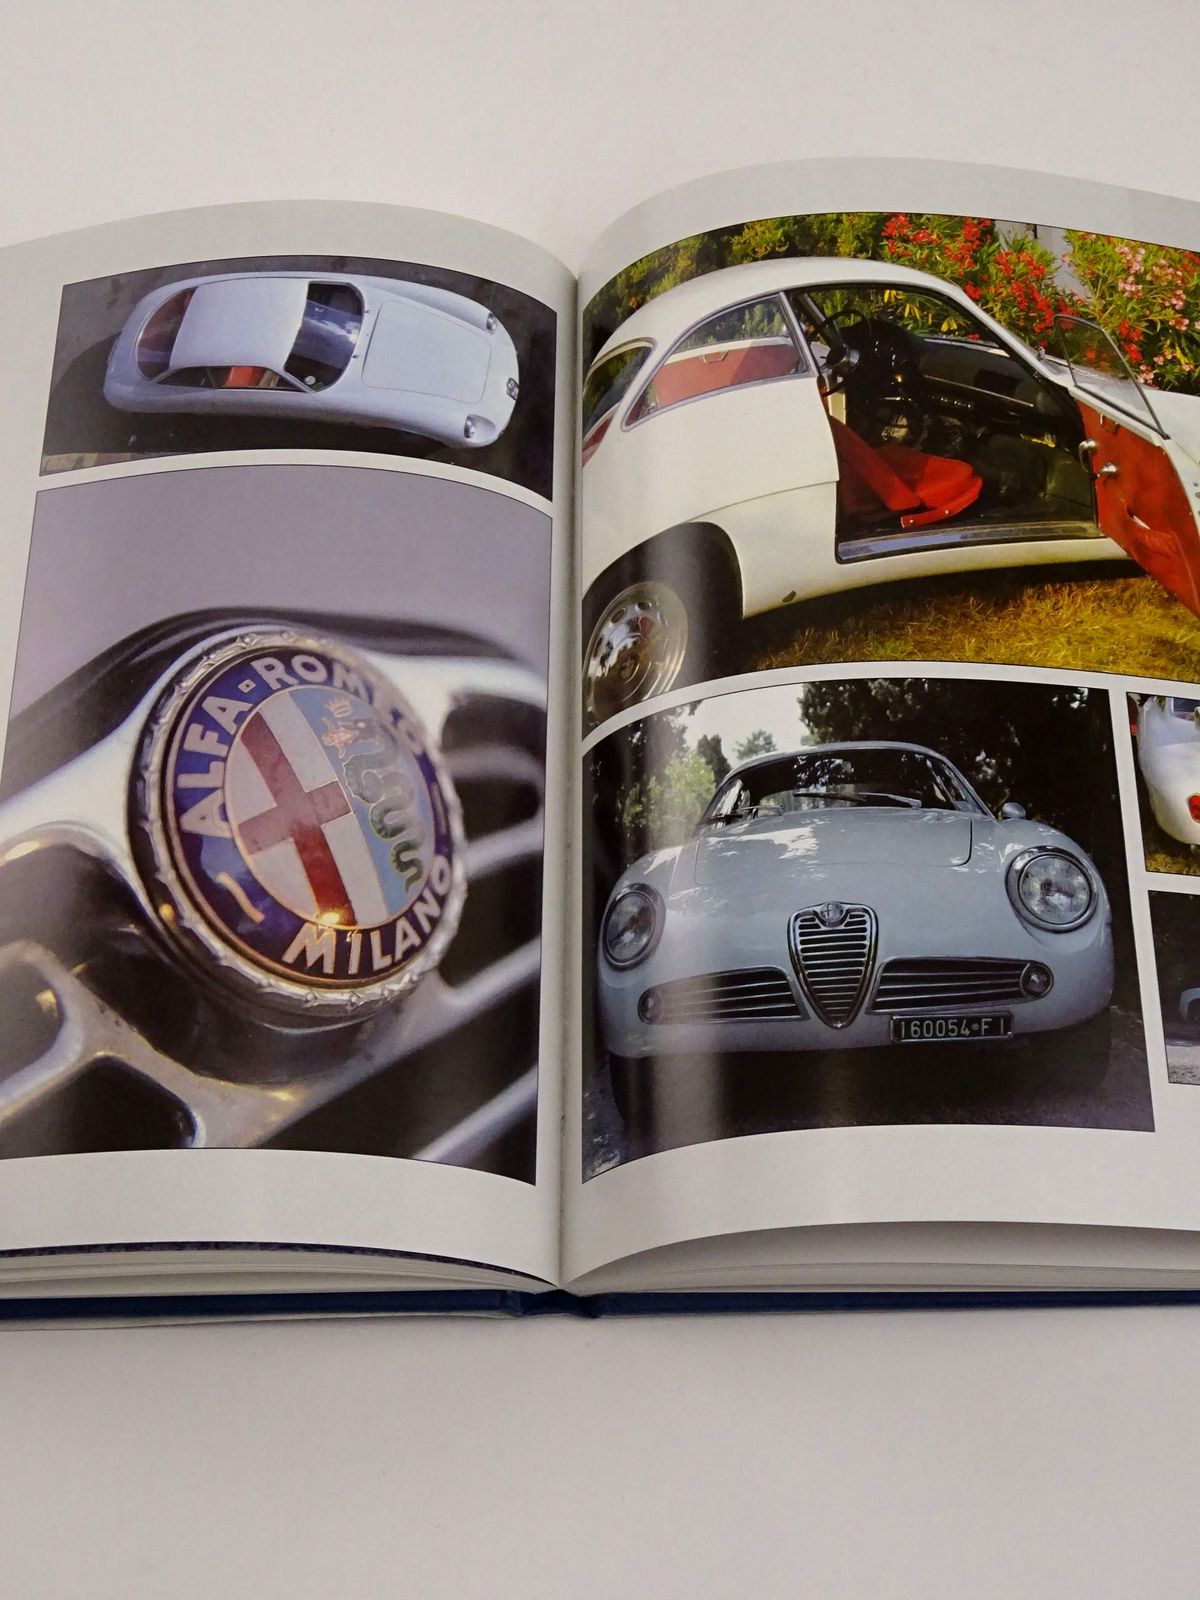 Photo of ALFA-ROMEO VELOCE: THE RACING GIULIETTAS 1956-1963 written by Hughes, Donald
Da Prato, Vito Witting published by Foulis, Haynes (STOCK CODE: 1818480)  for sale by Stella & Rose's Books